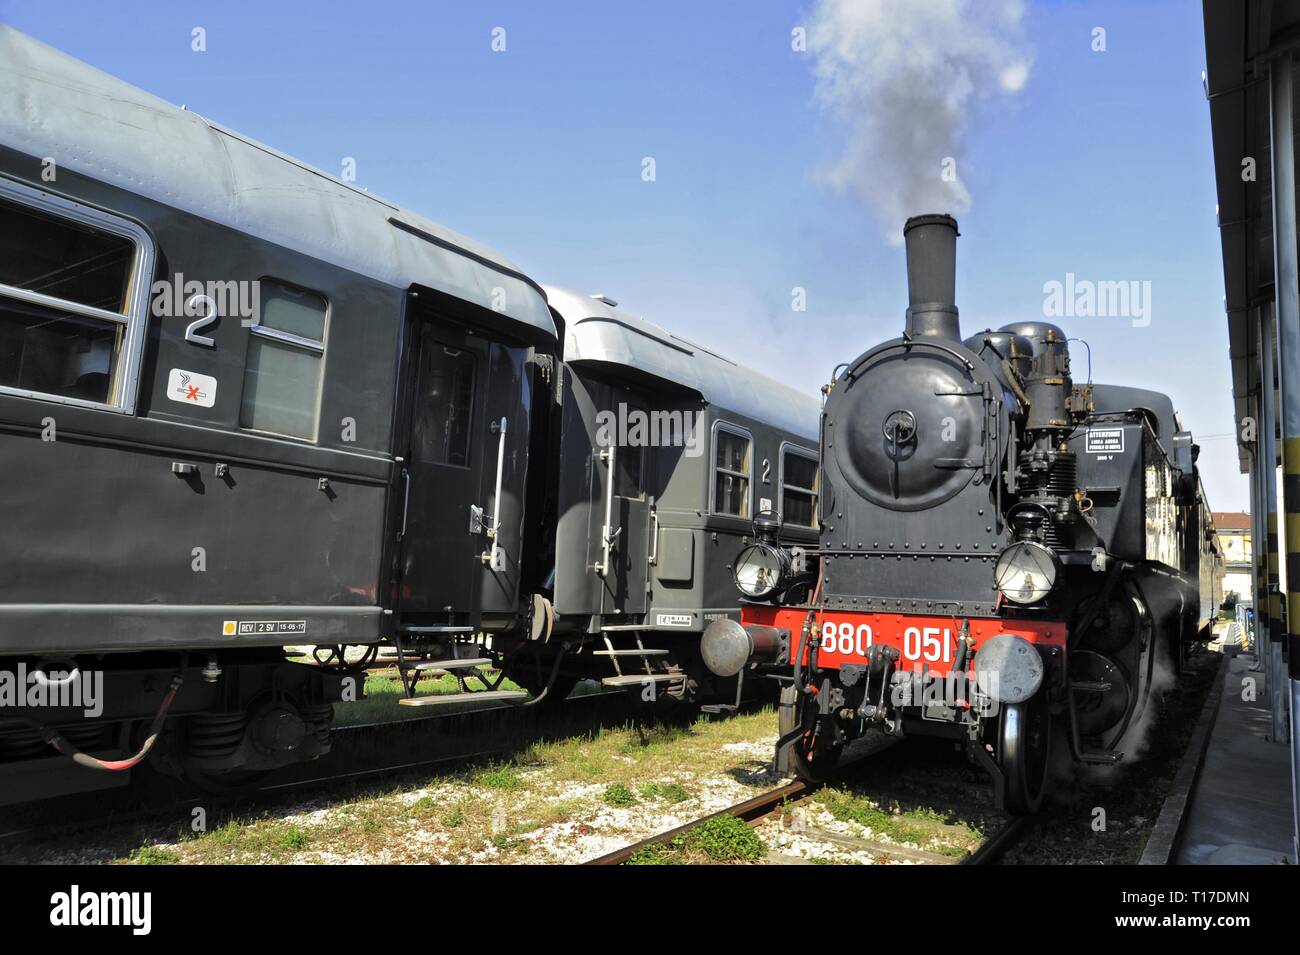 Italy, foundation FS Italiane, open day at the workshops of the 'Squadra Rialzo' of Milano Centrale station, where historical trains are preserved and restored, on the occasion of the FAI Spring Days. Steam locomotive 880 Stock Photo